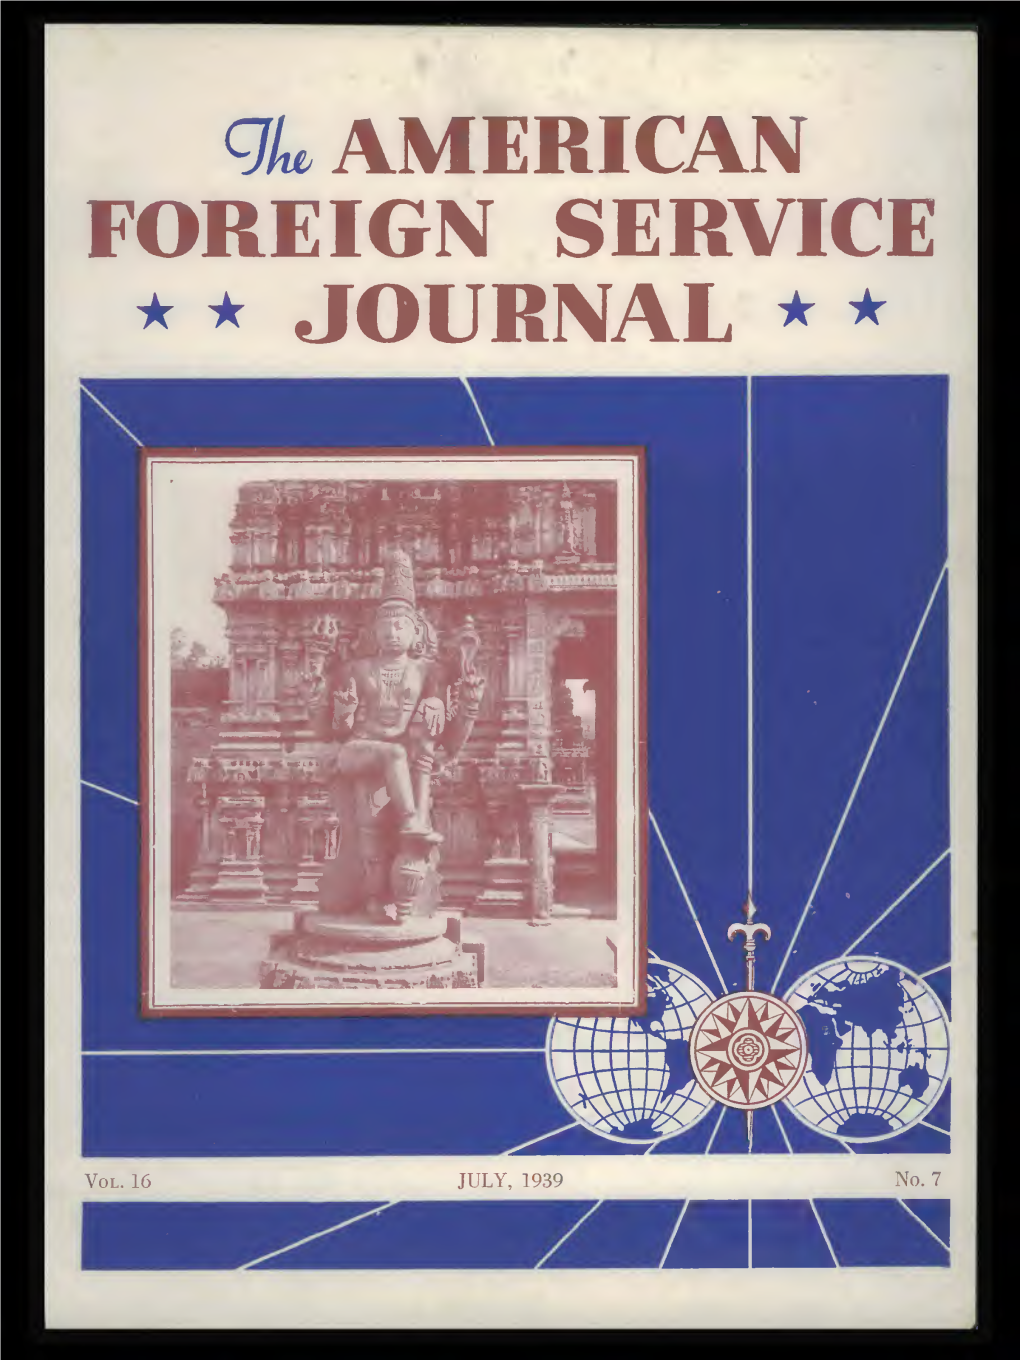 The Foreign Service Journal, July 1939